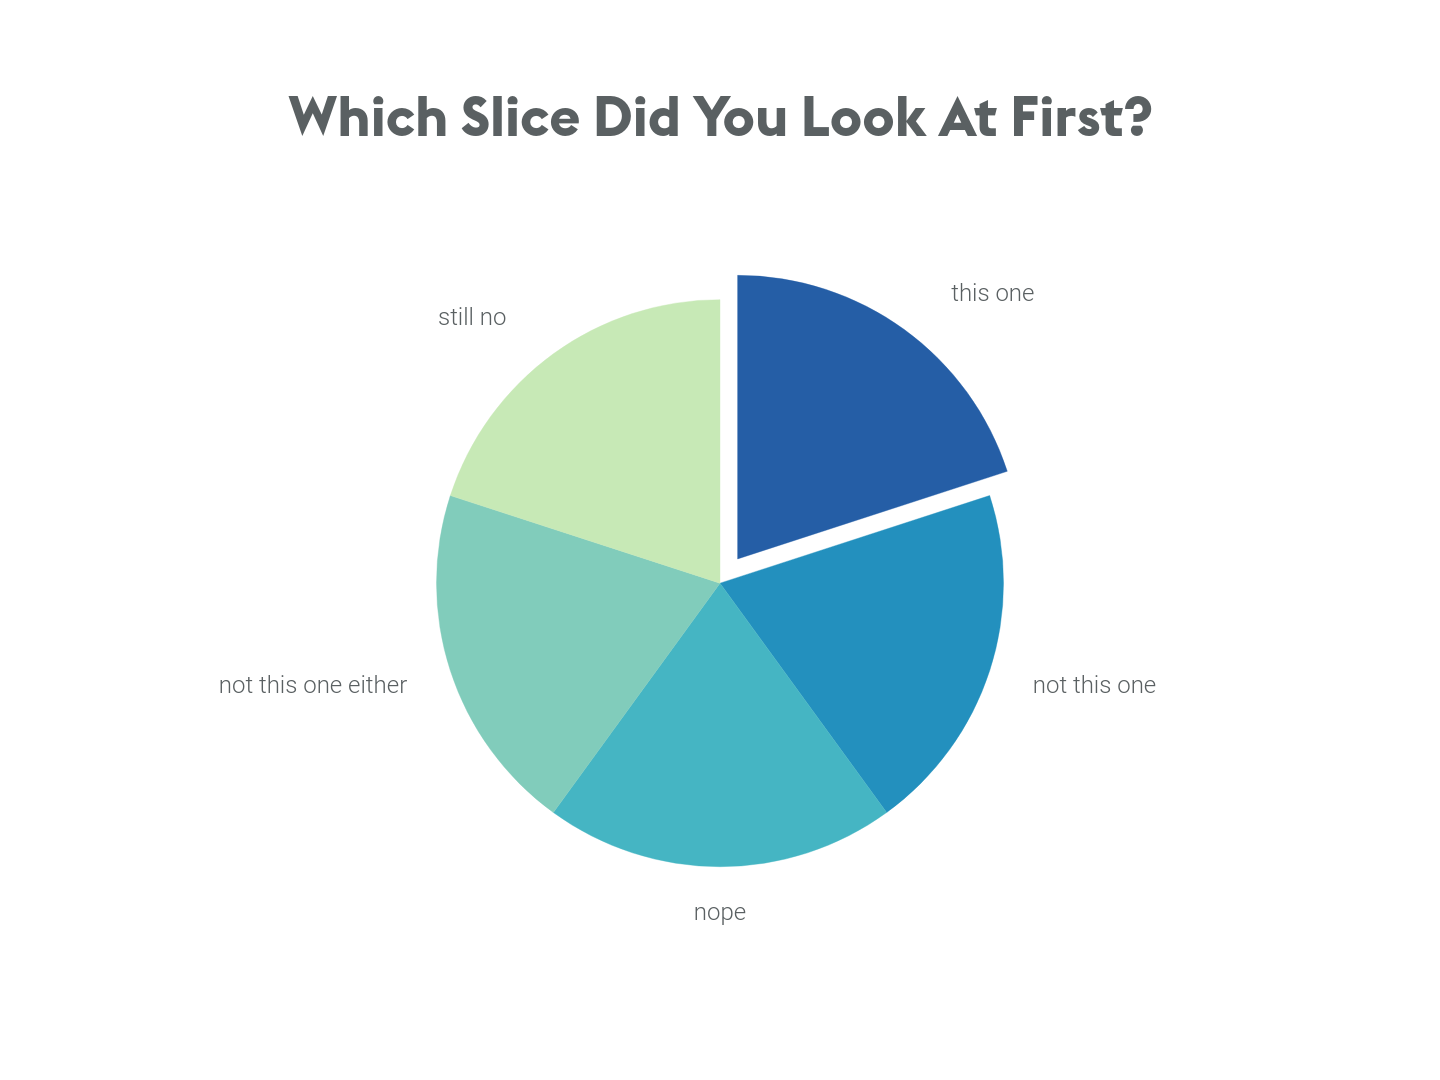 pie chart showing exploding slices